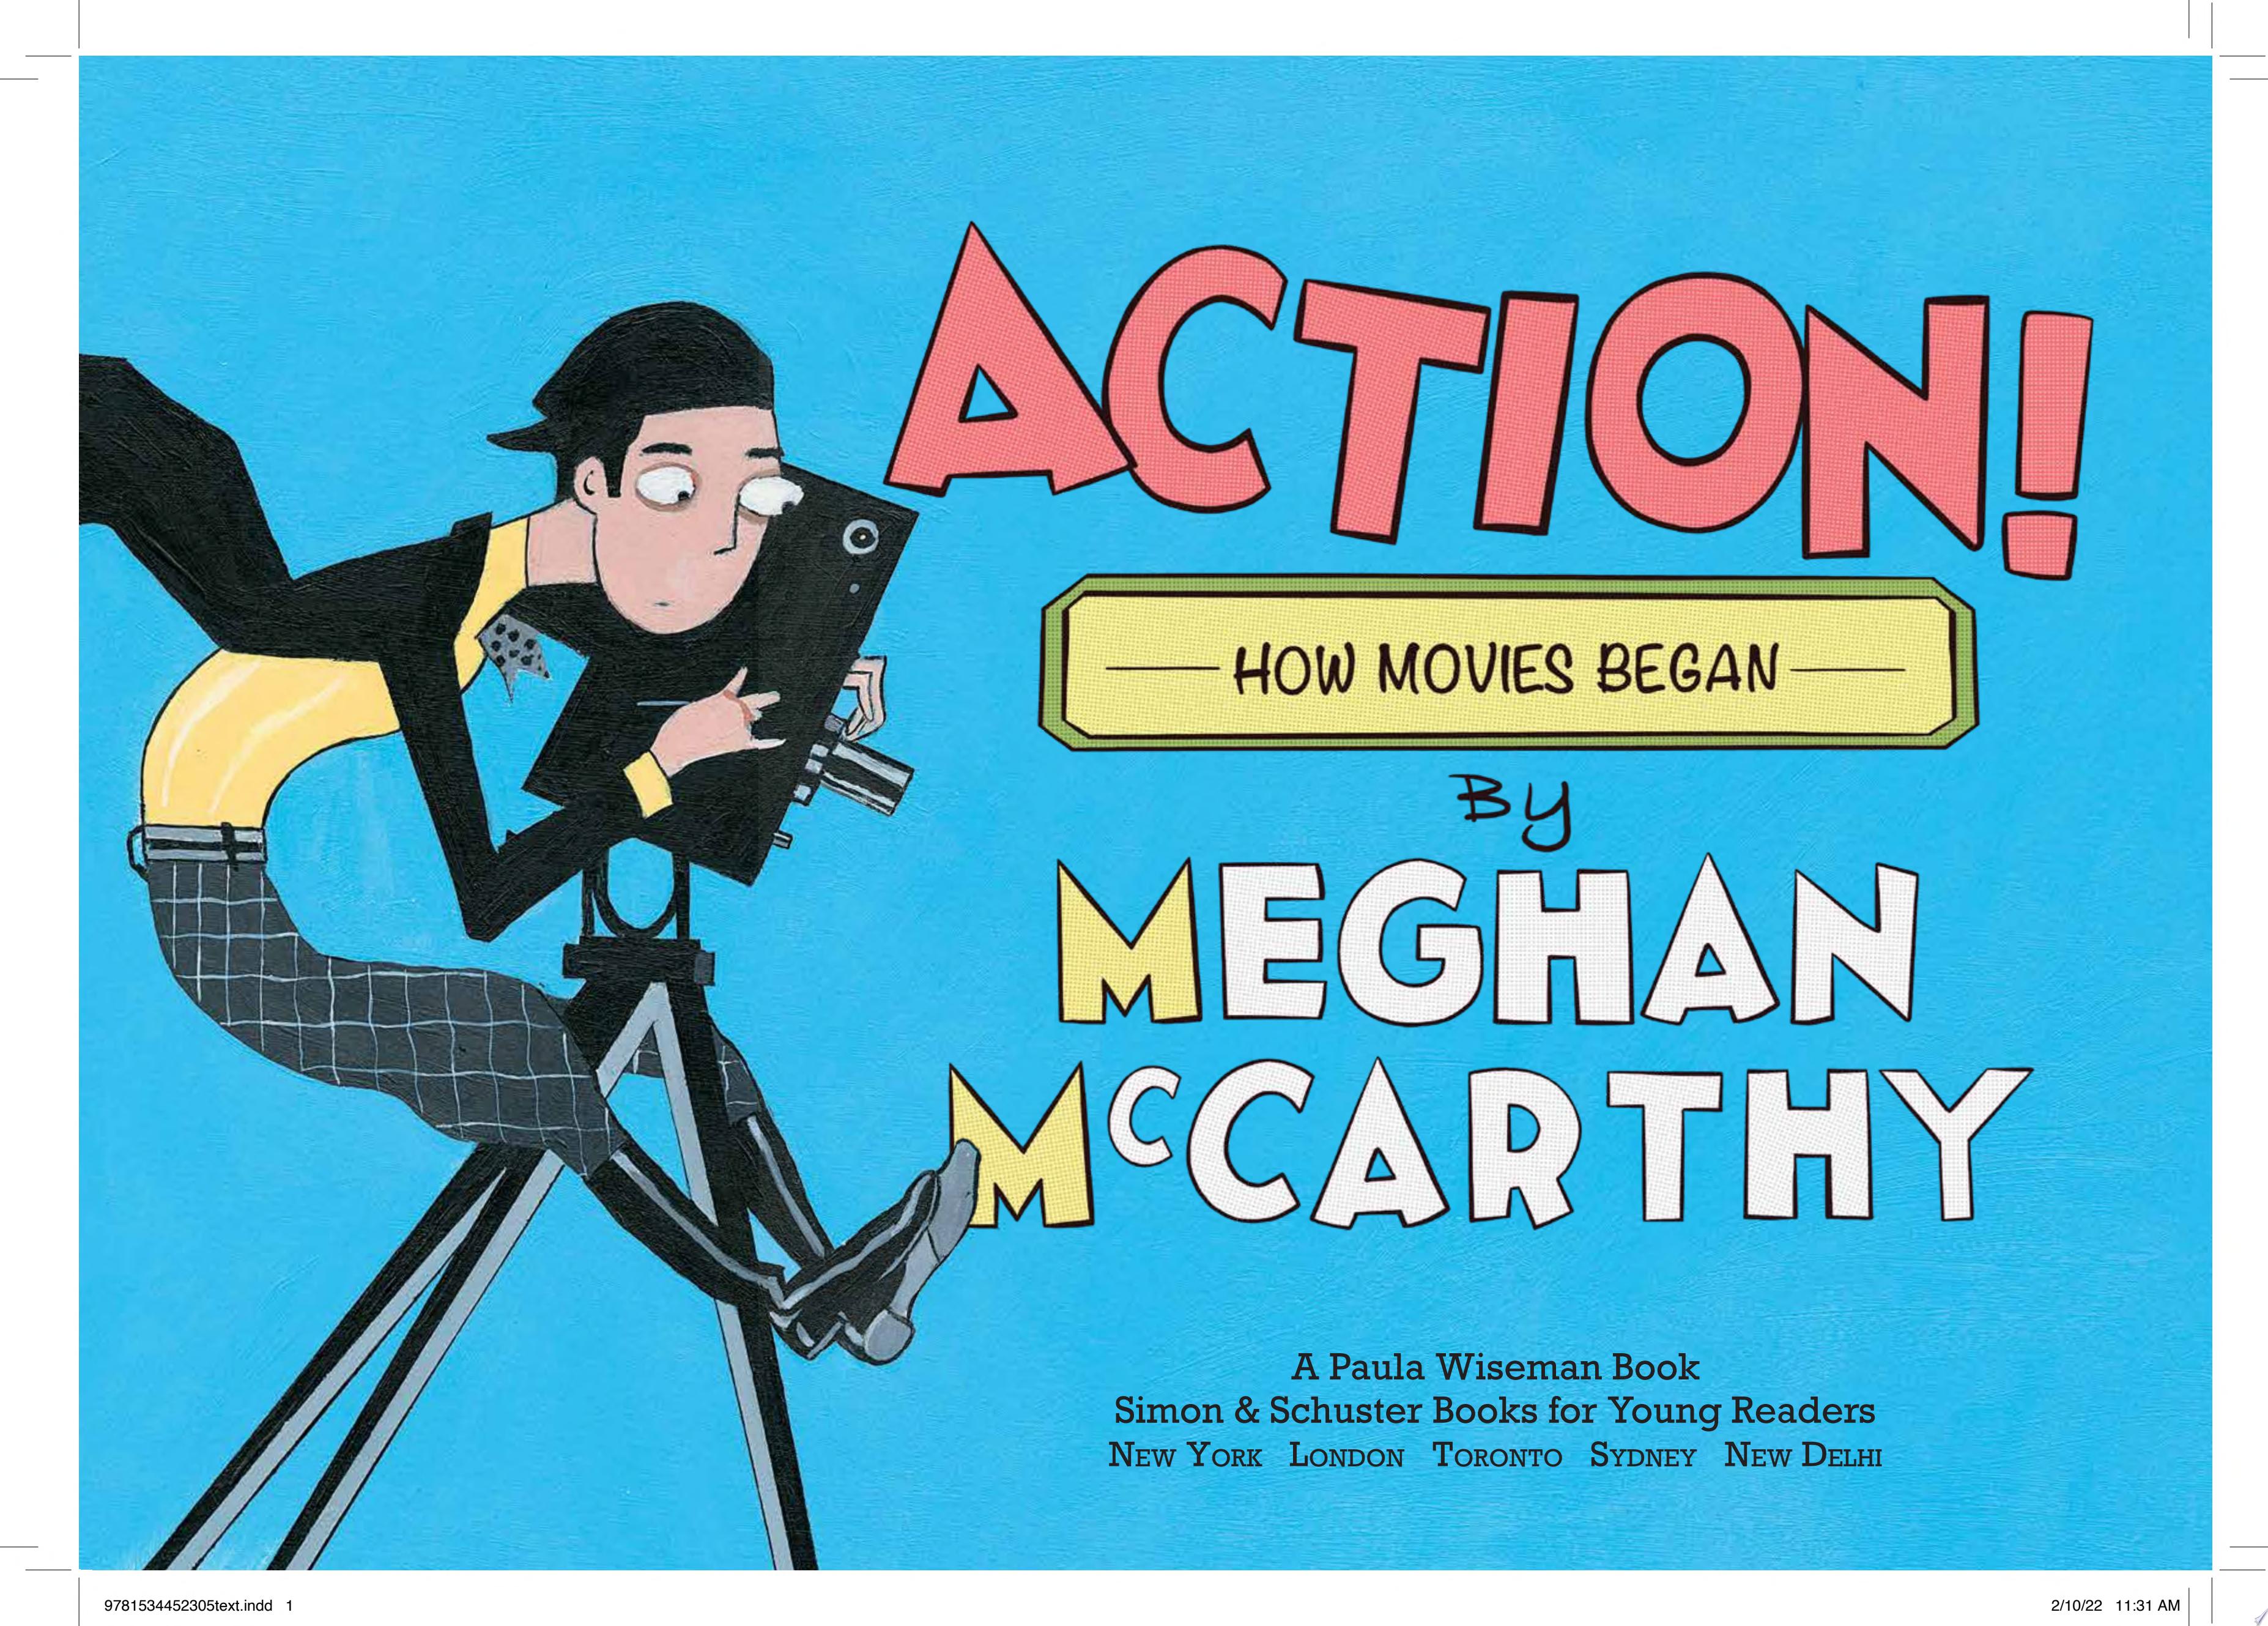 Image for "Action!"